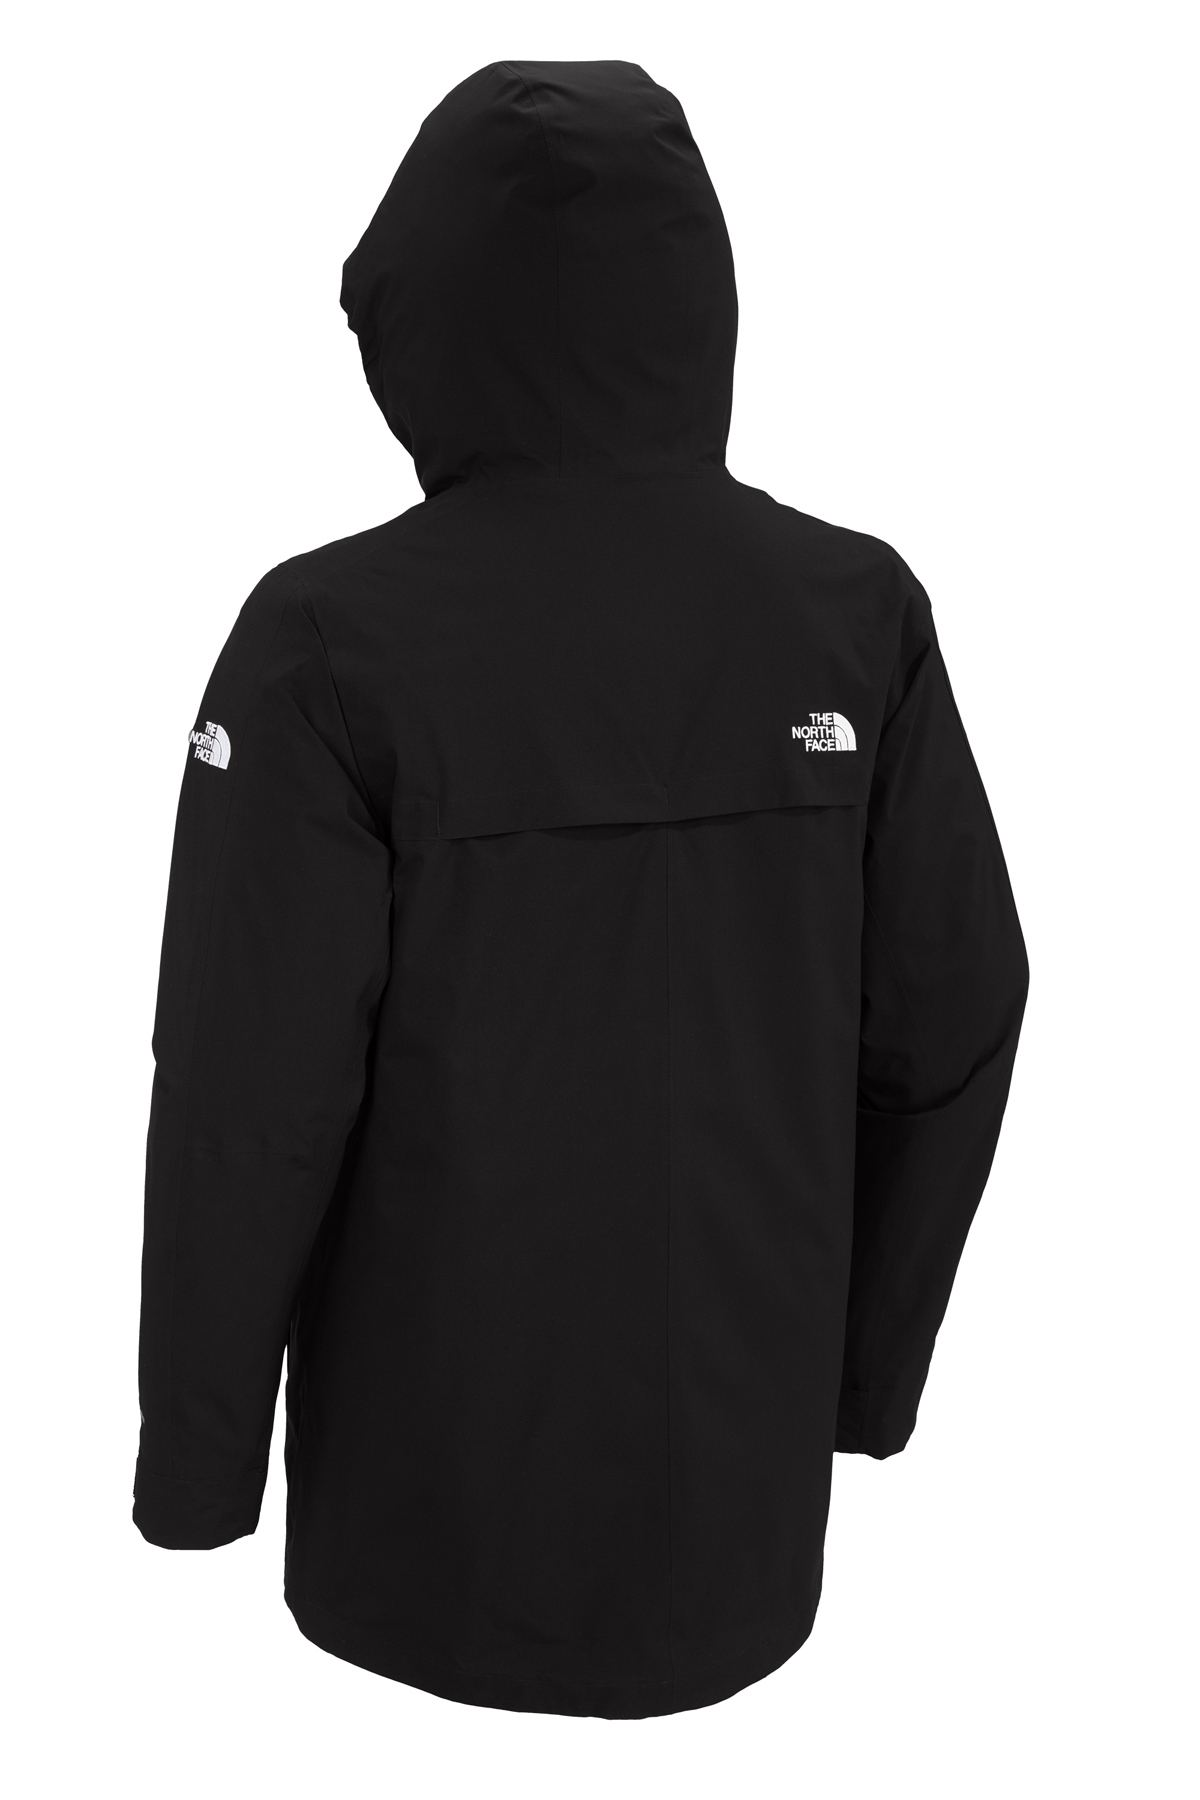 The North Face City Parka | Product | SanMar